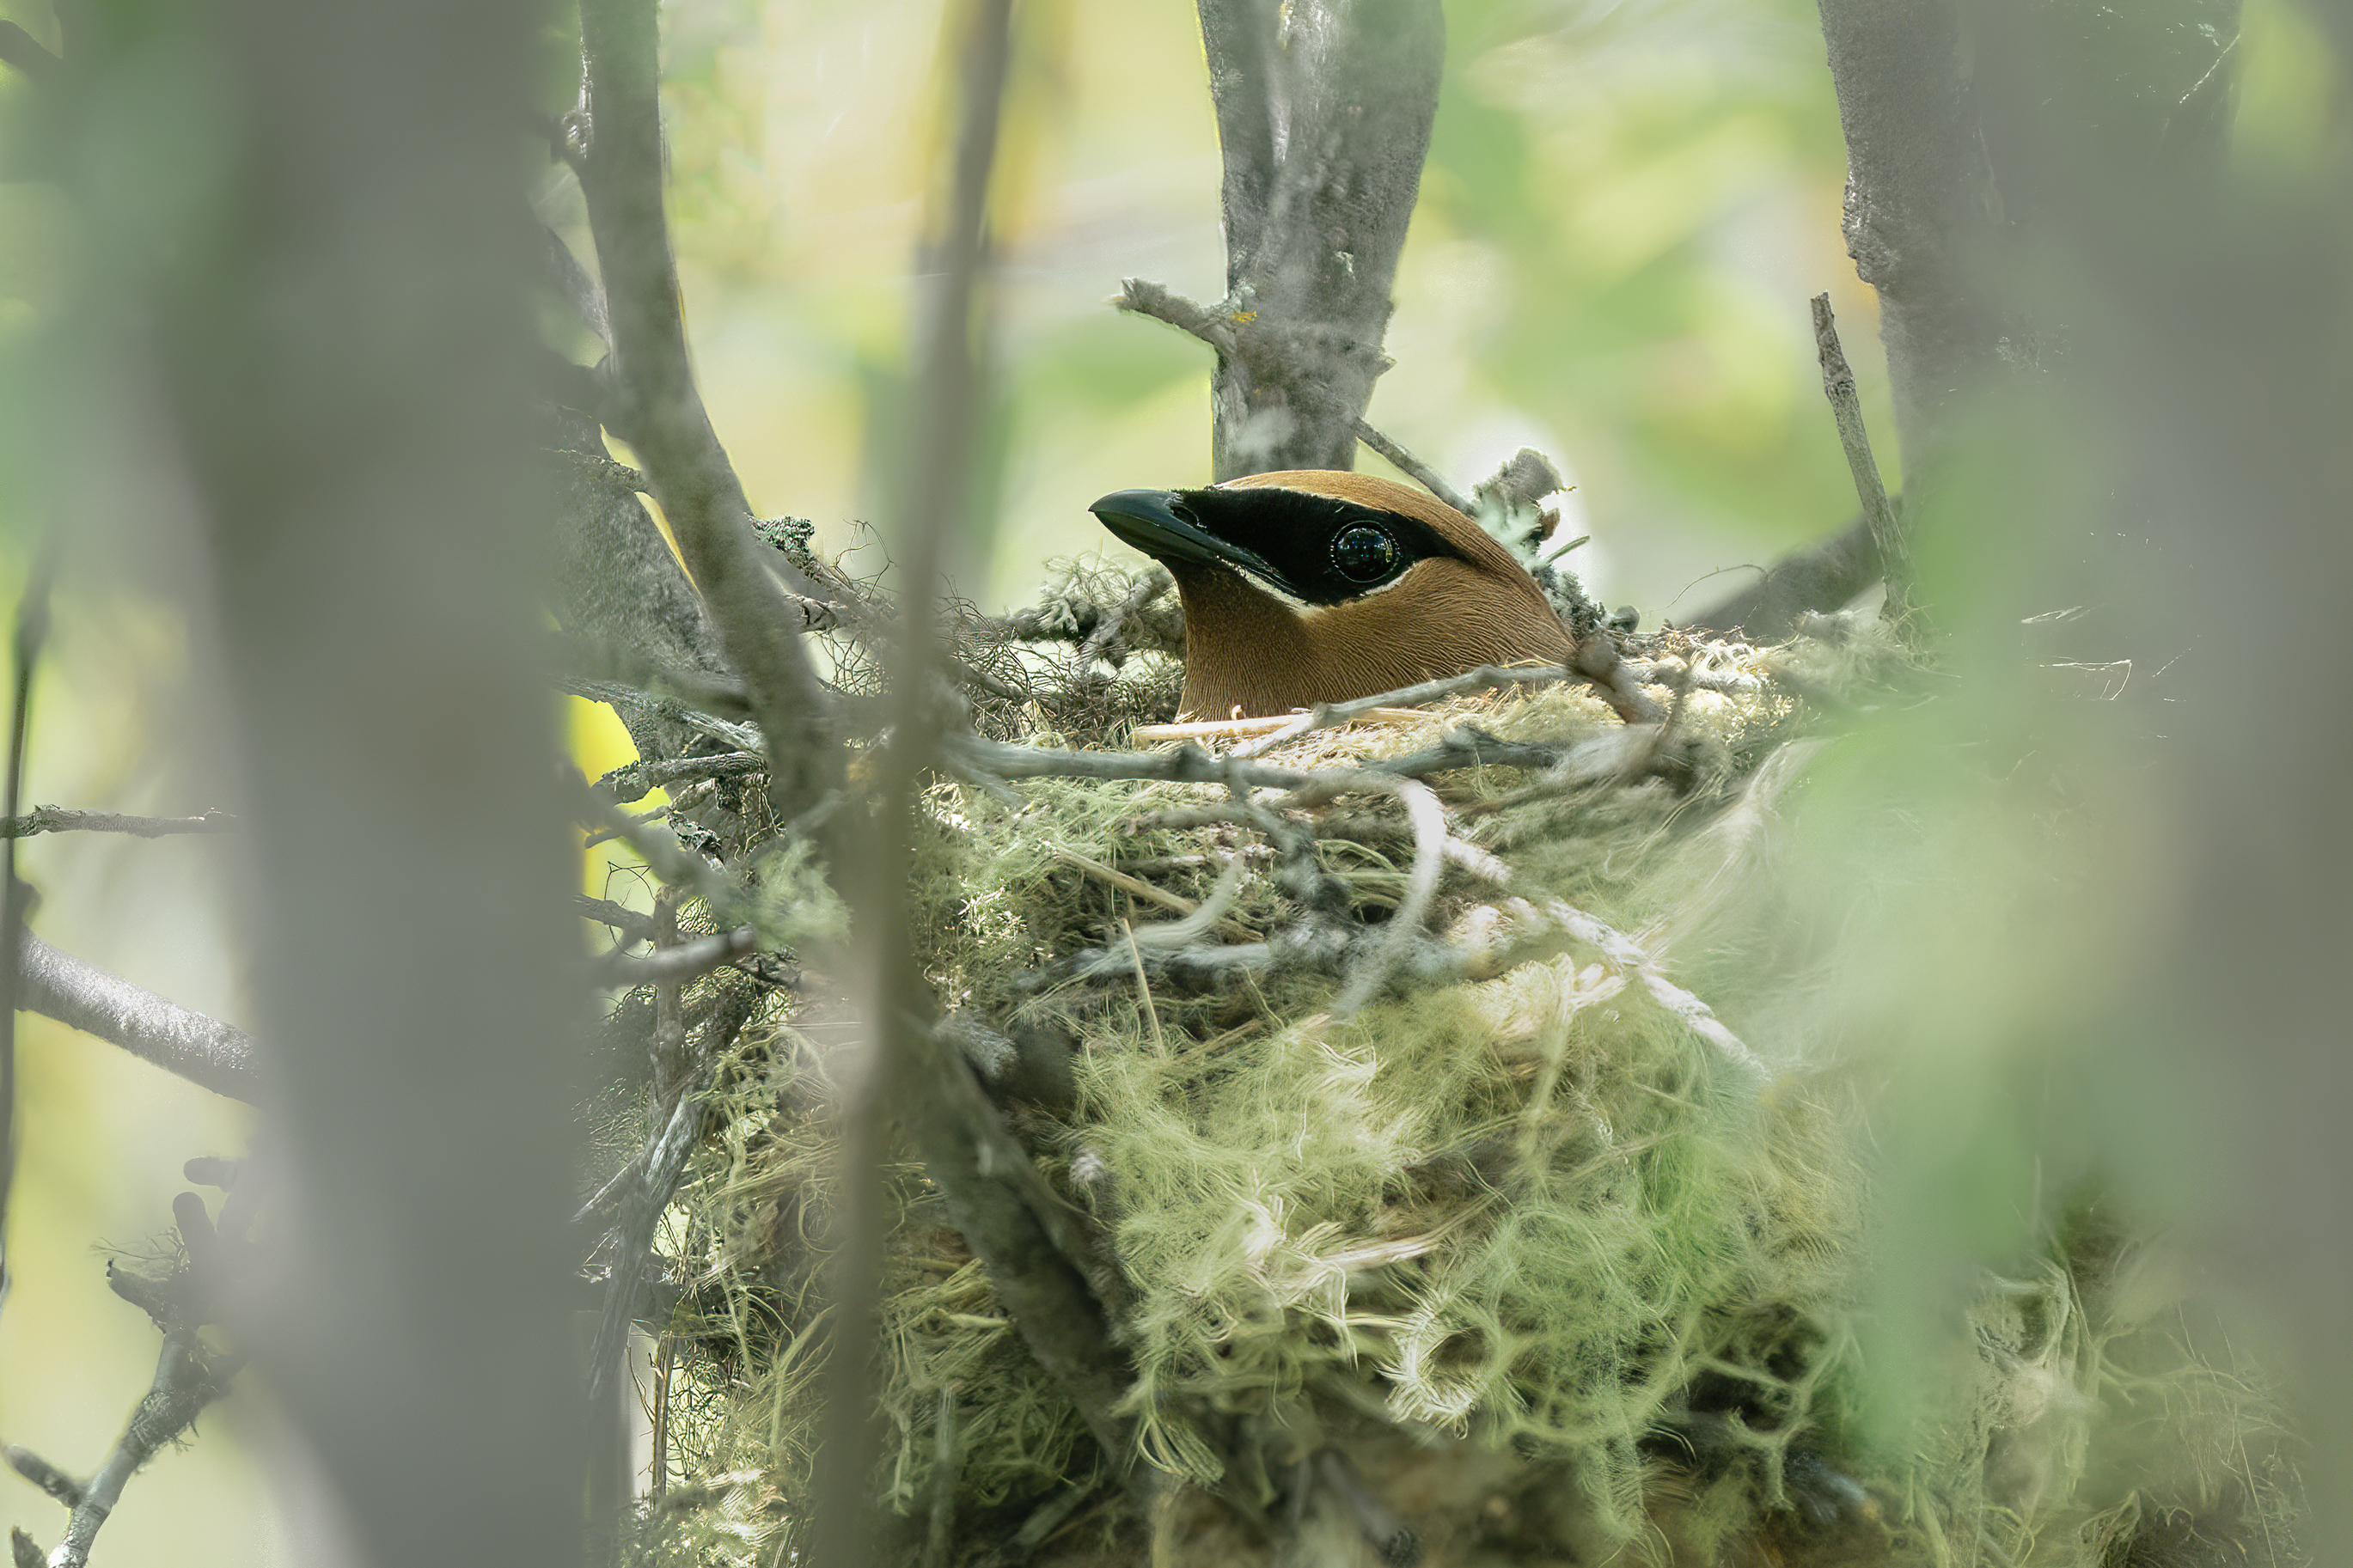 A cedar waxwing with its beak poking out from a nest